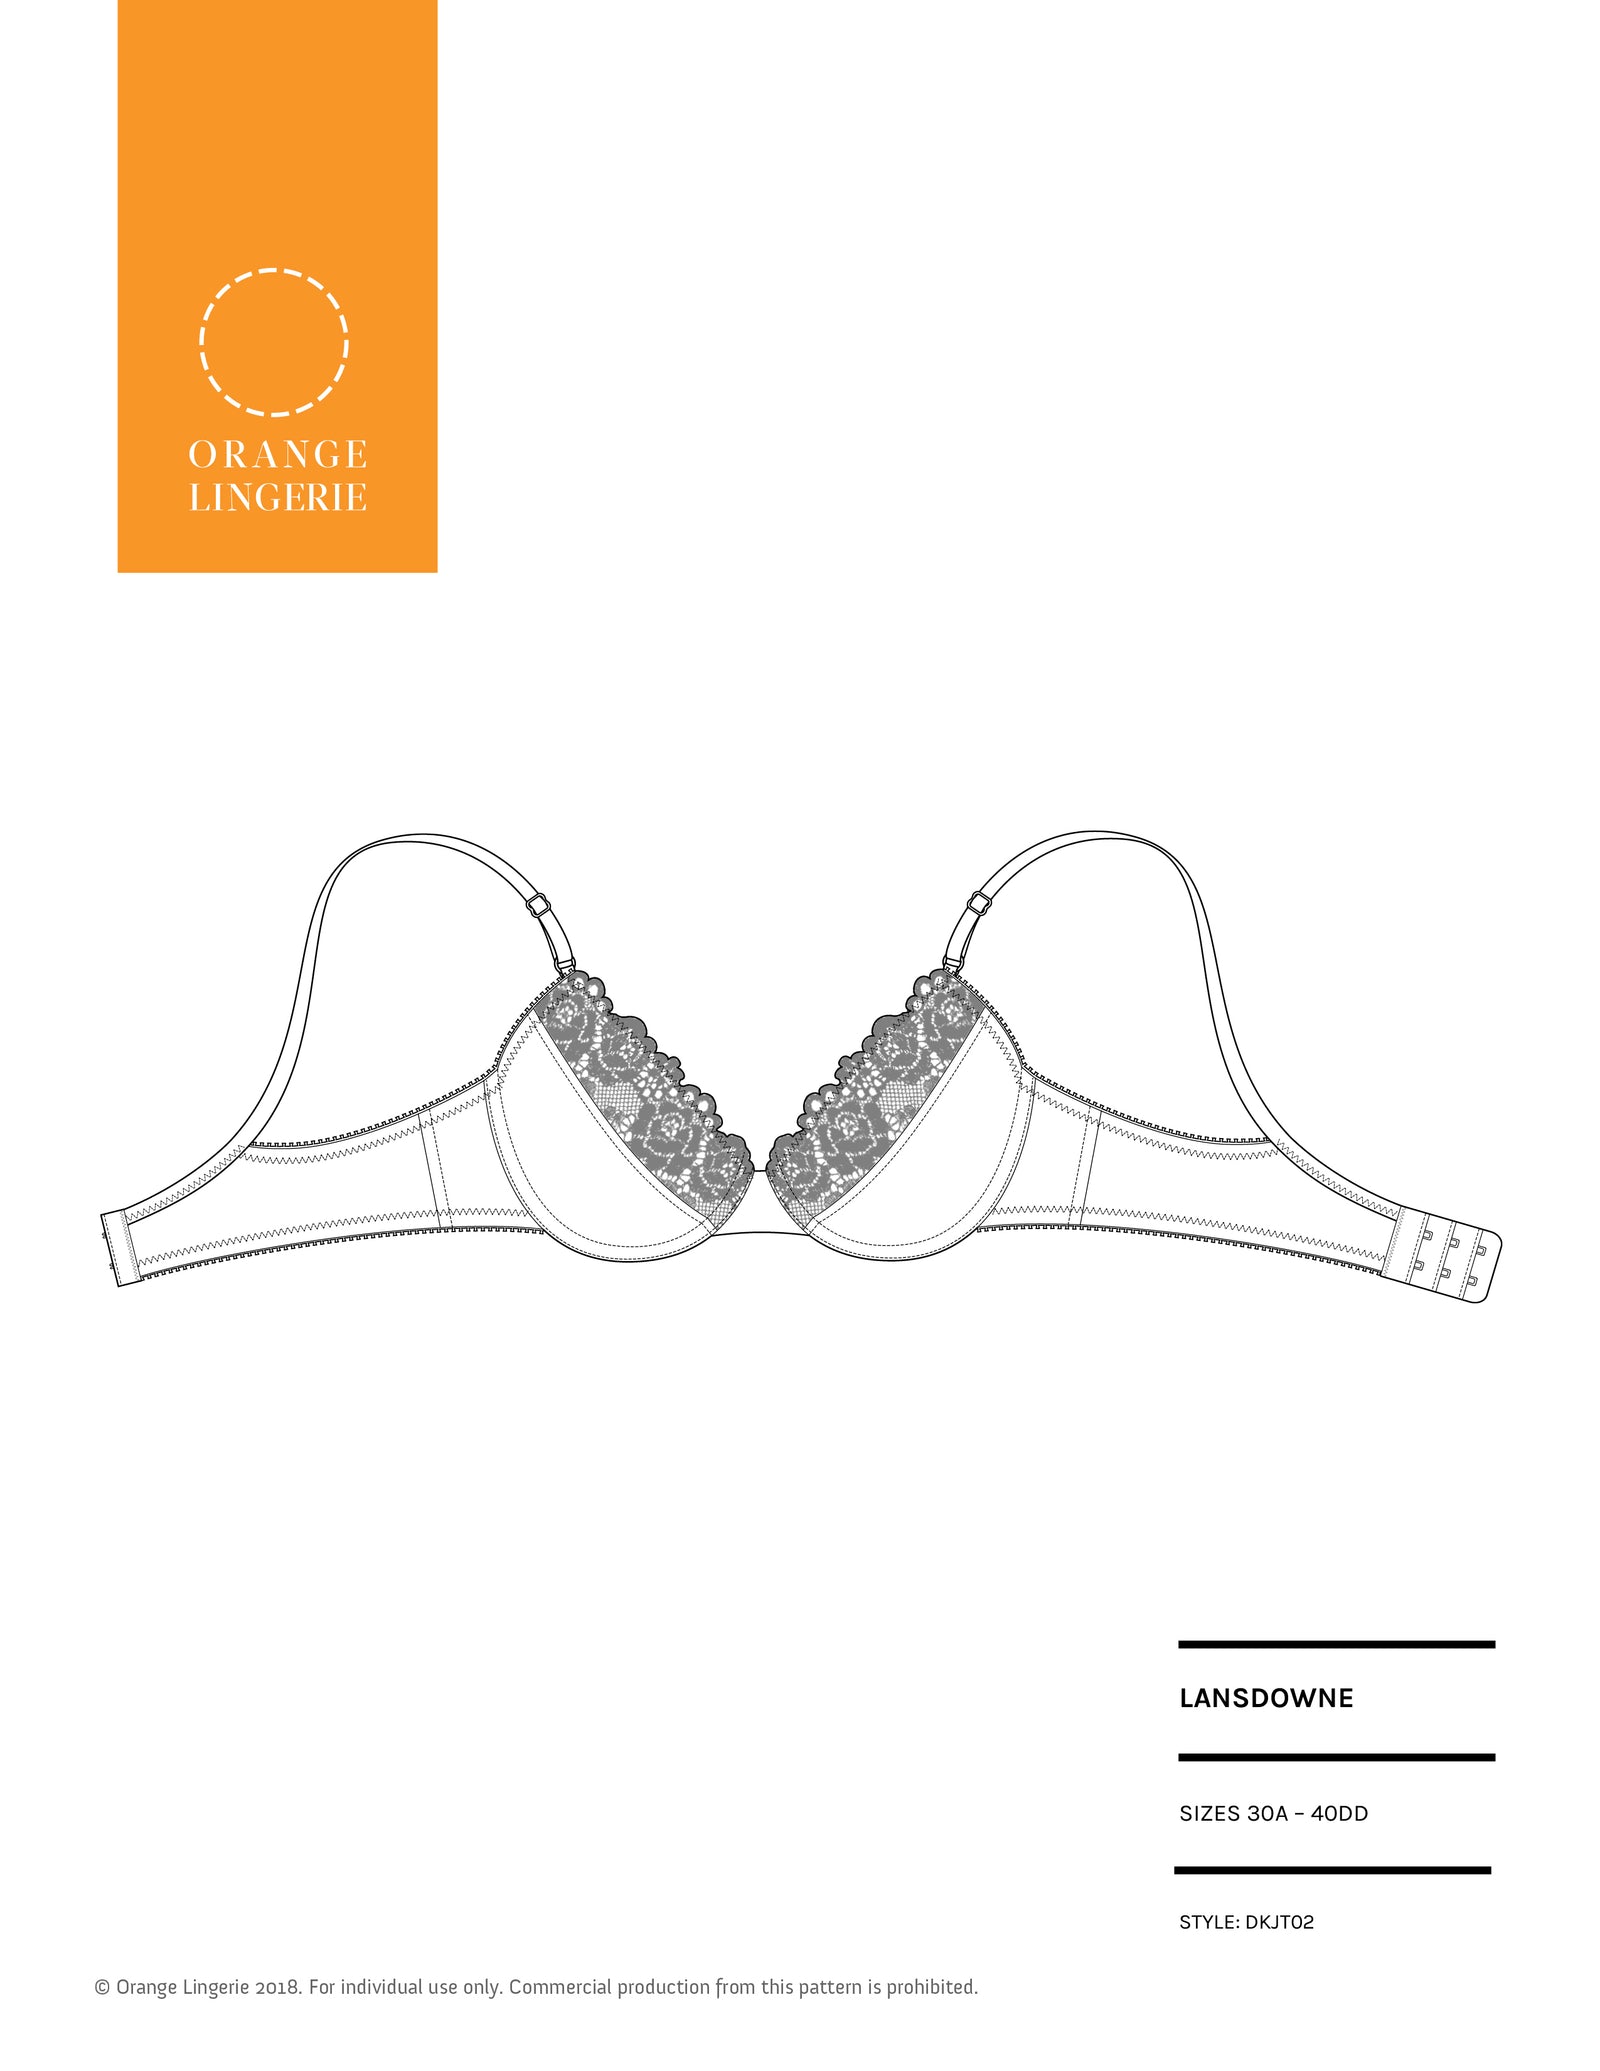 The Fastest Way to Find Your Bra Pattern Size - Orange Lingerie